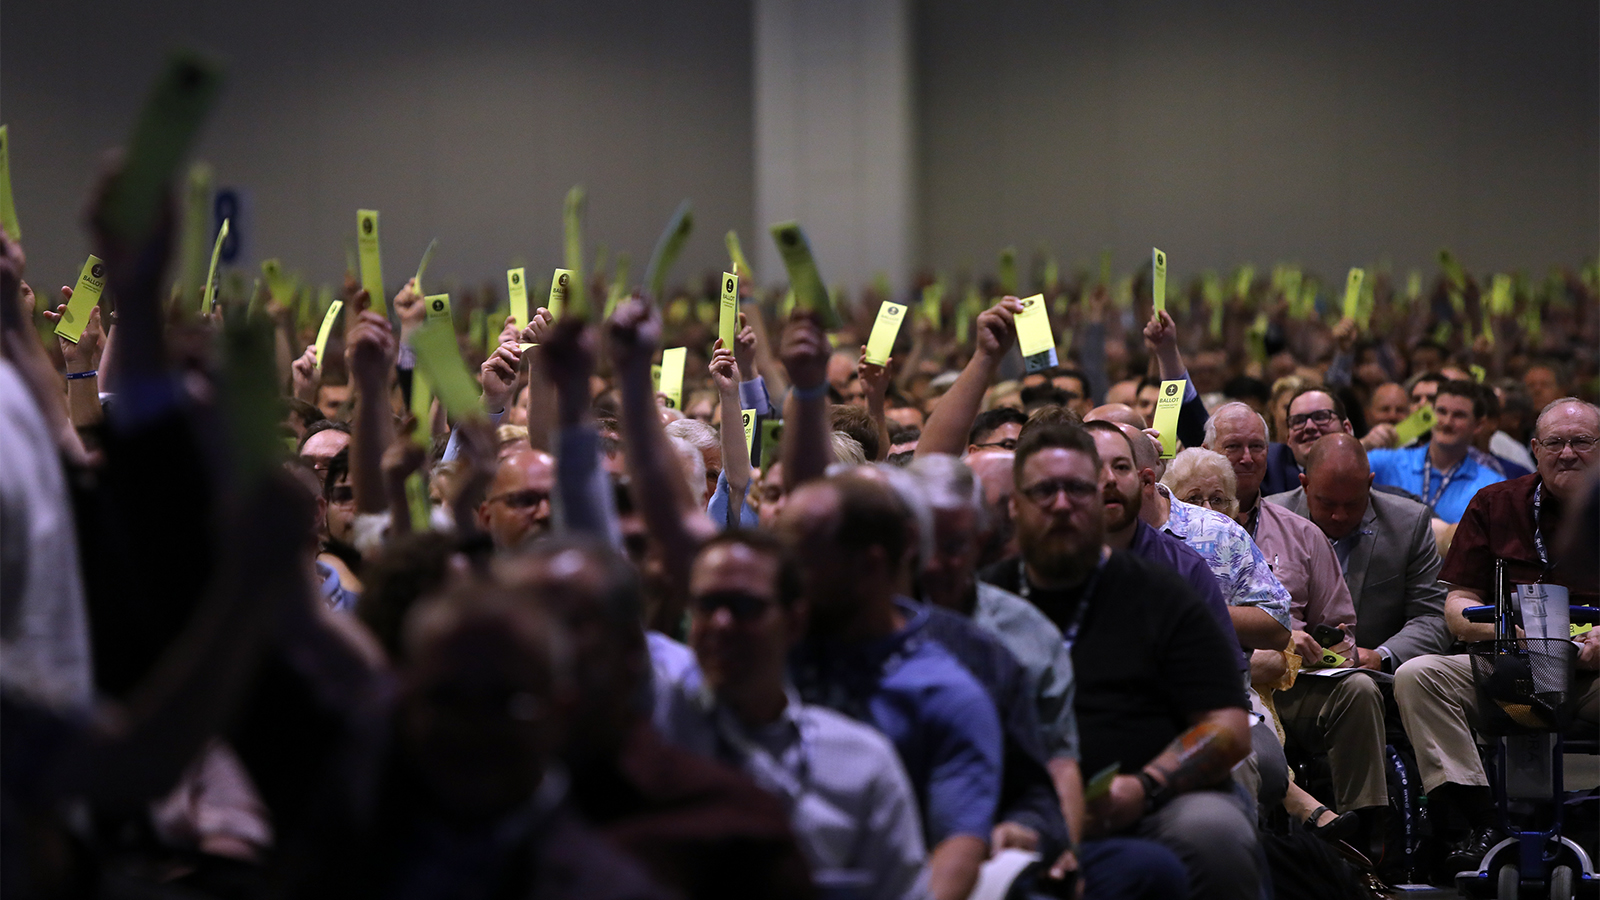 Messengers vote during the Southern Baptist Convention annual meeting at Music City Center, Tuesday, June 15, 2021, in Nashville. RNS photo by Kit Doyle